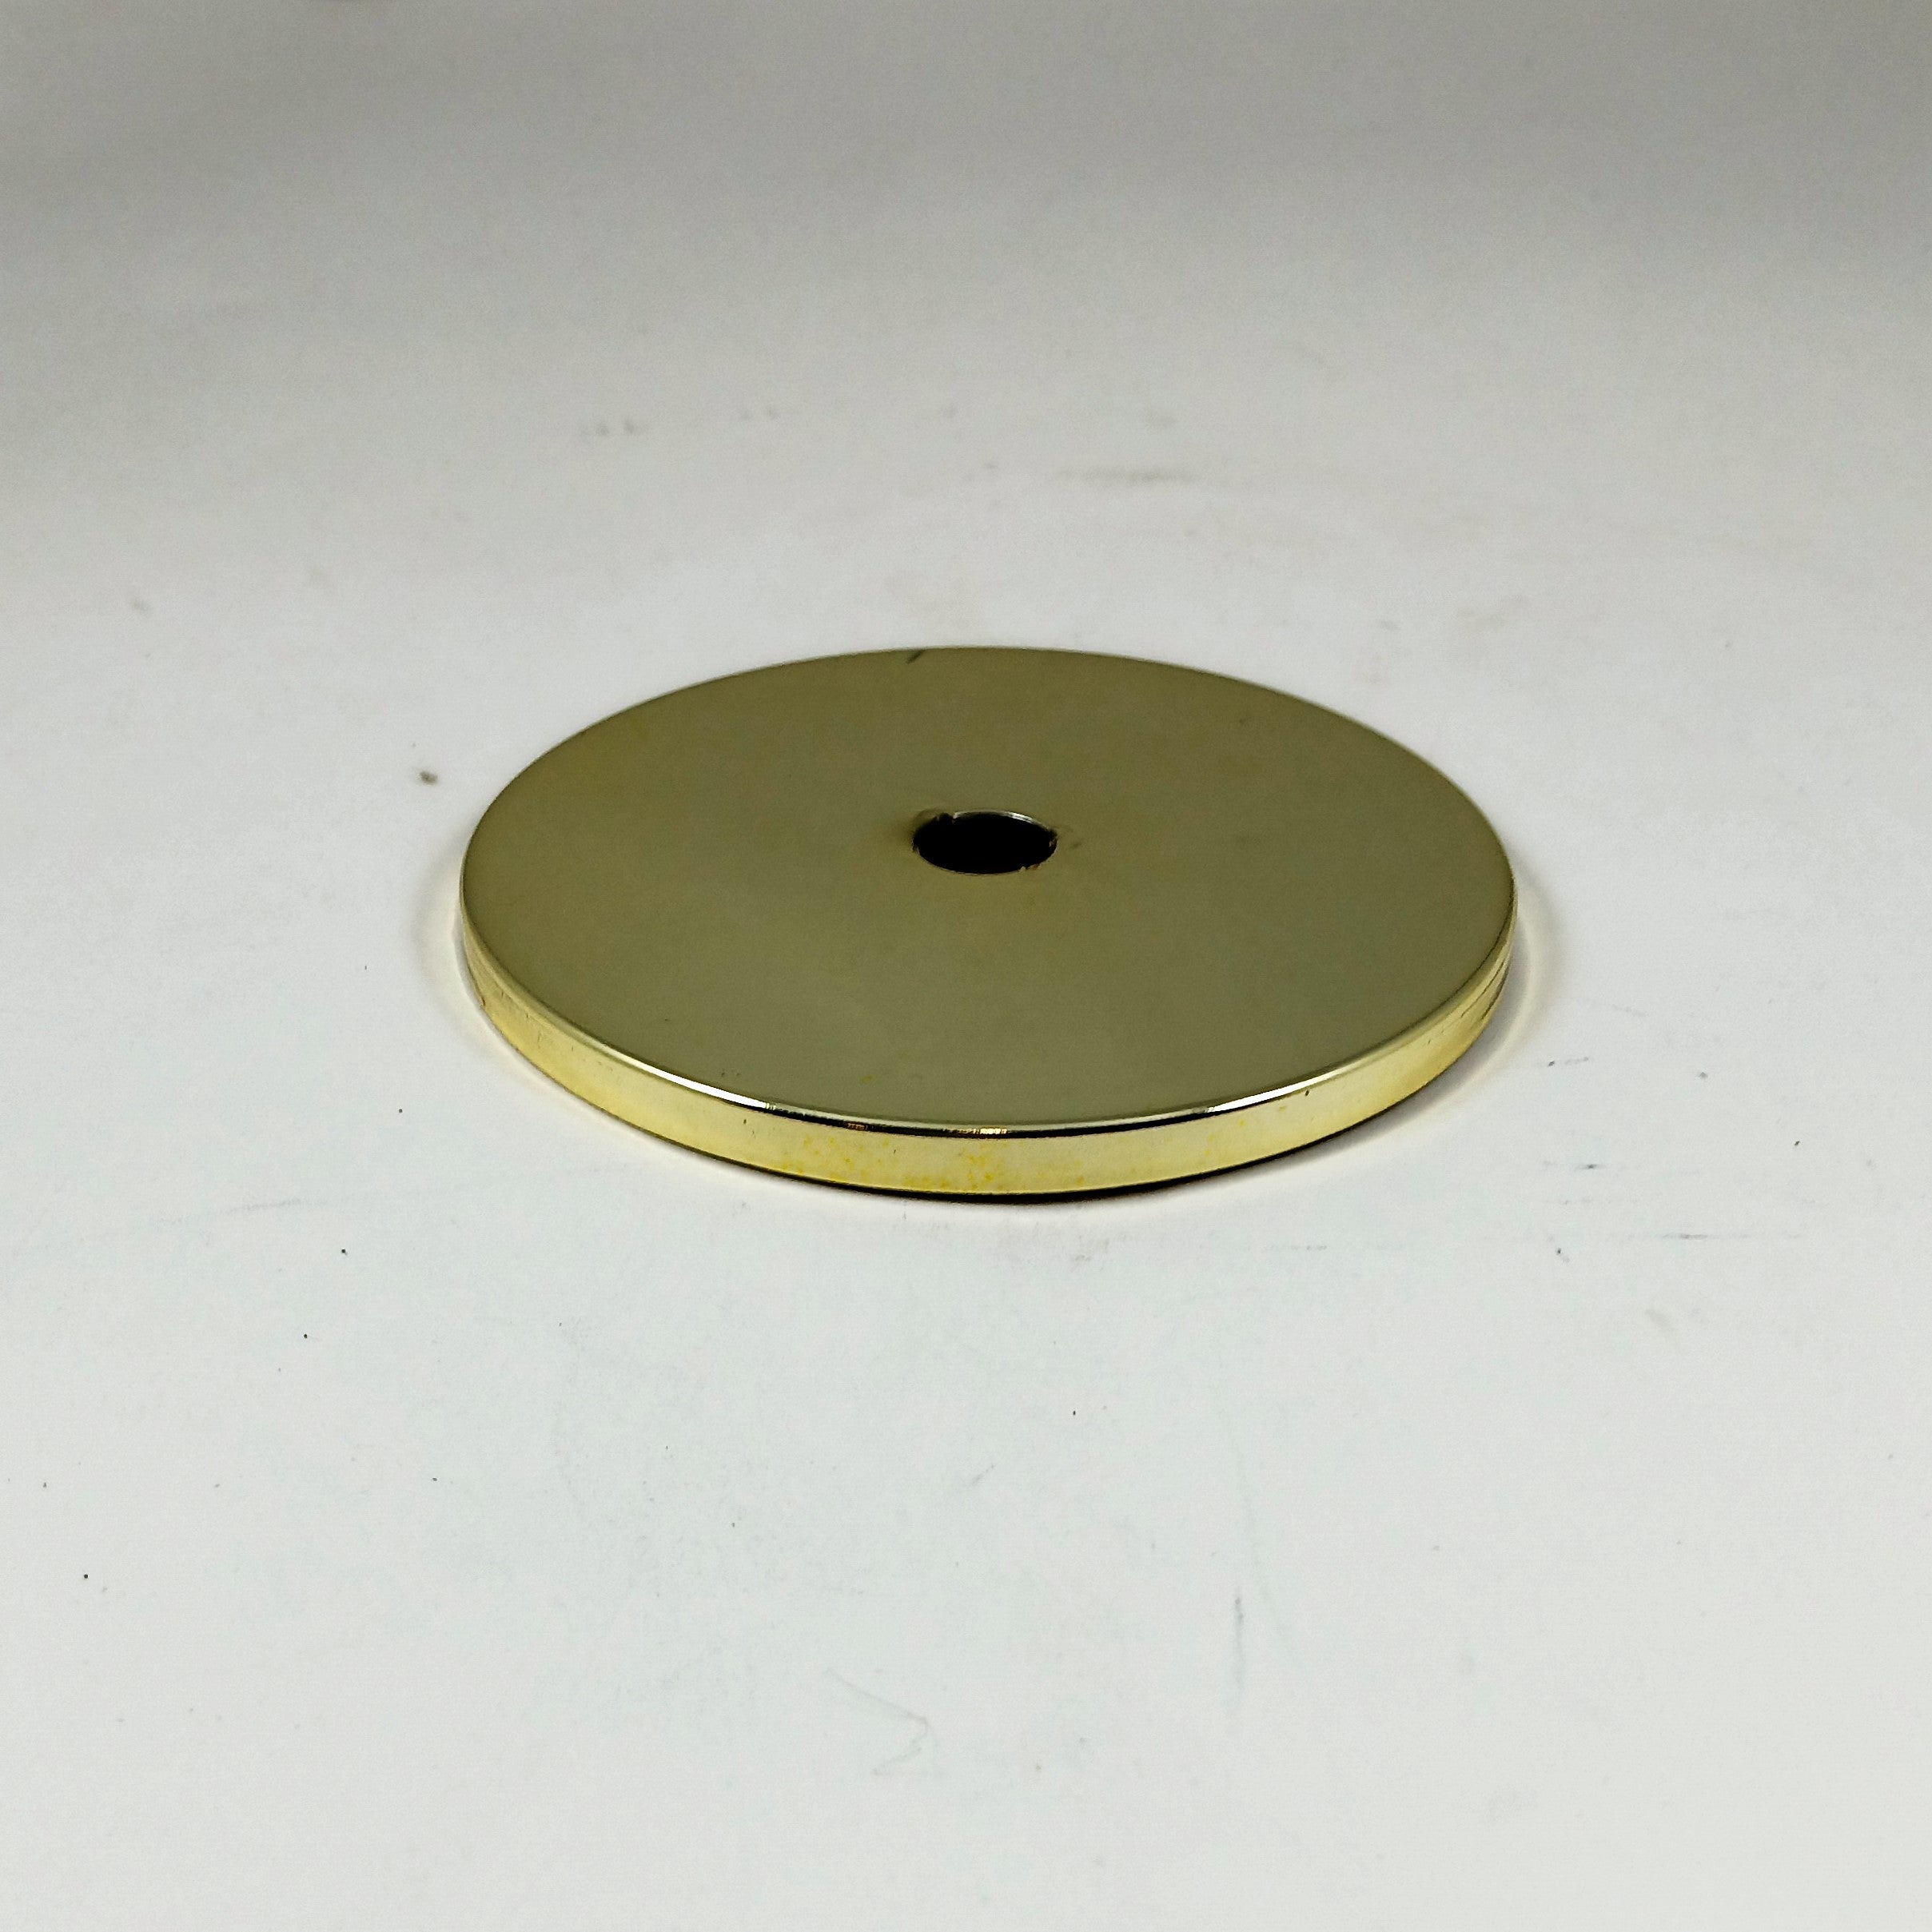 3-1/4" Brass Plated Round Flat Plate - Center Hole Slips 1/8 IPS